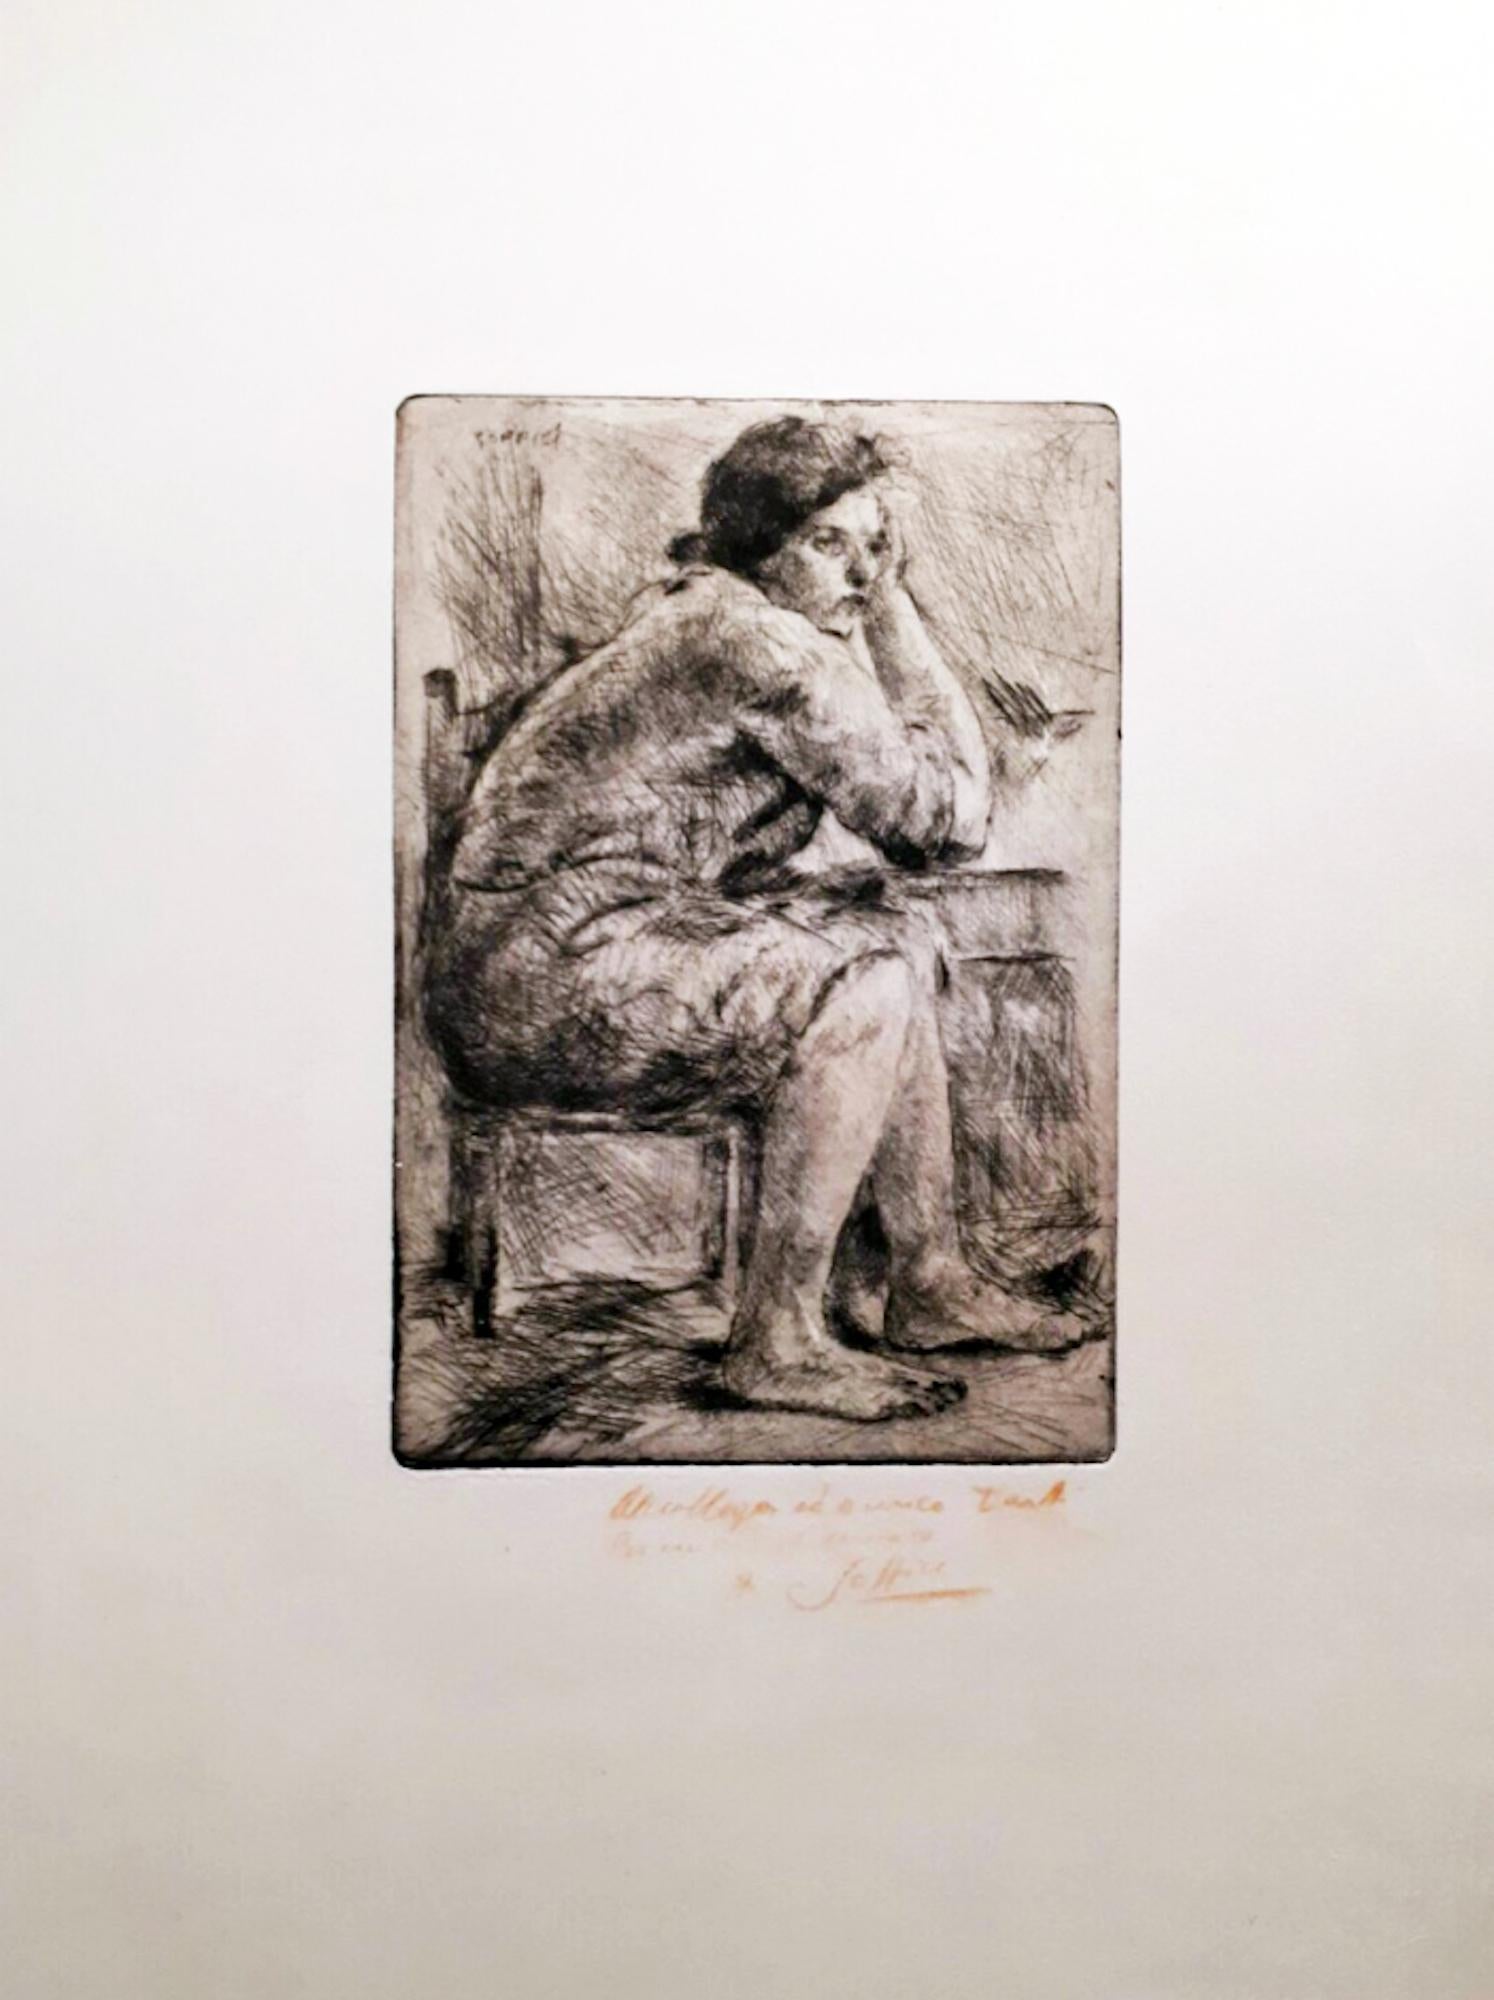 Ardengo Soffici Figurative Print - Hot Housekeeper - Original Etching and Drypoint by A. Soffici - 1957